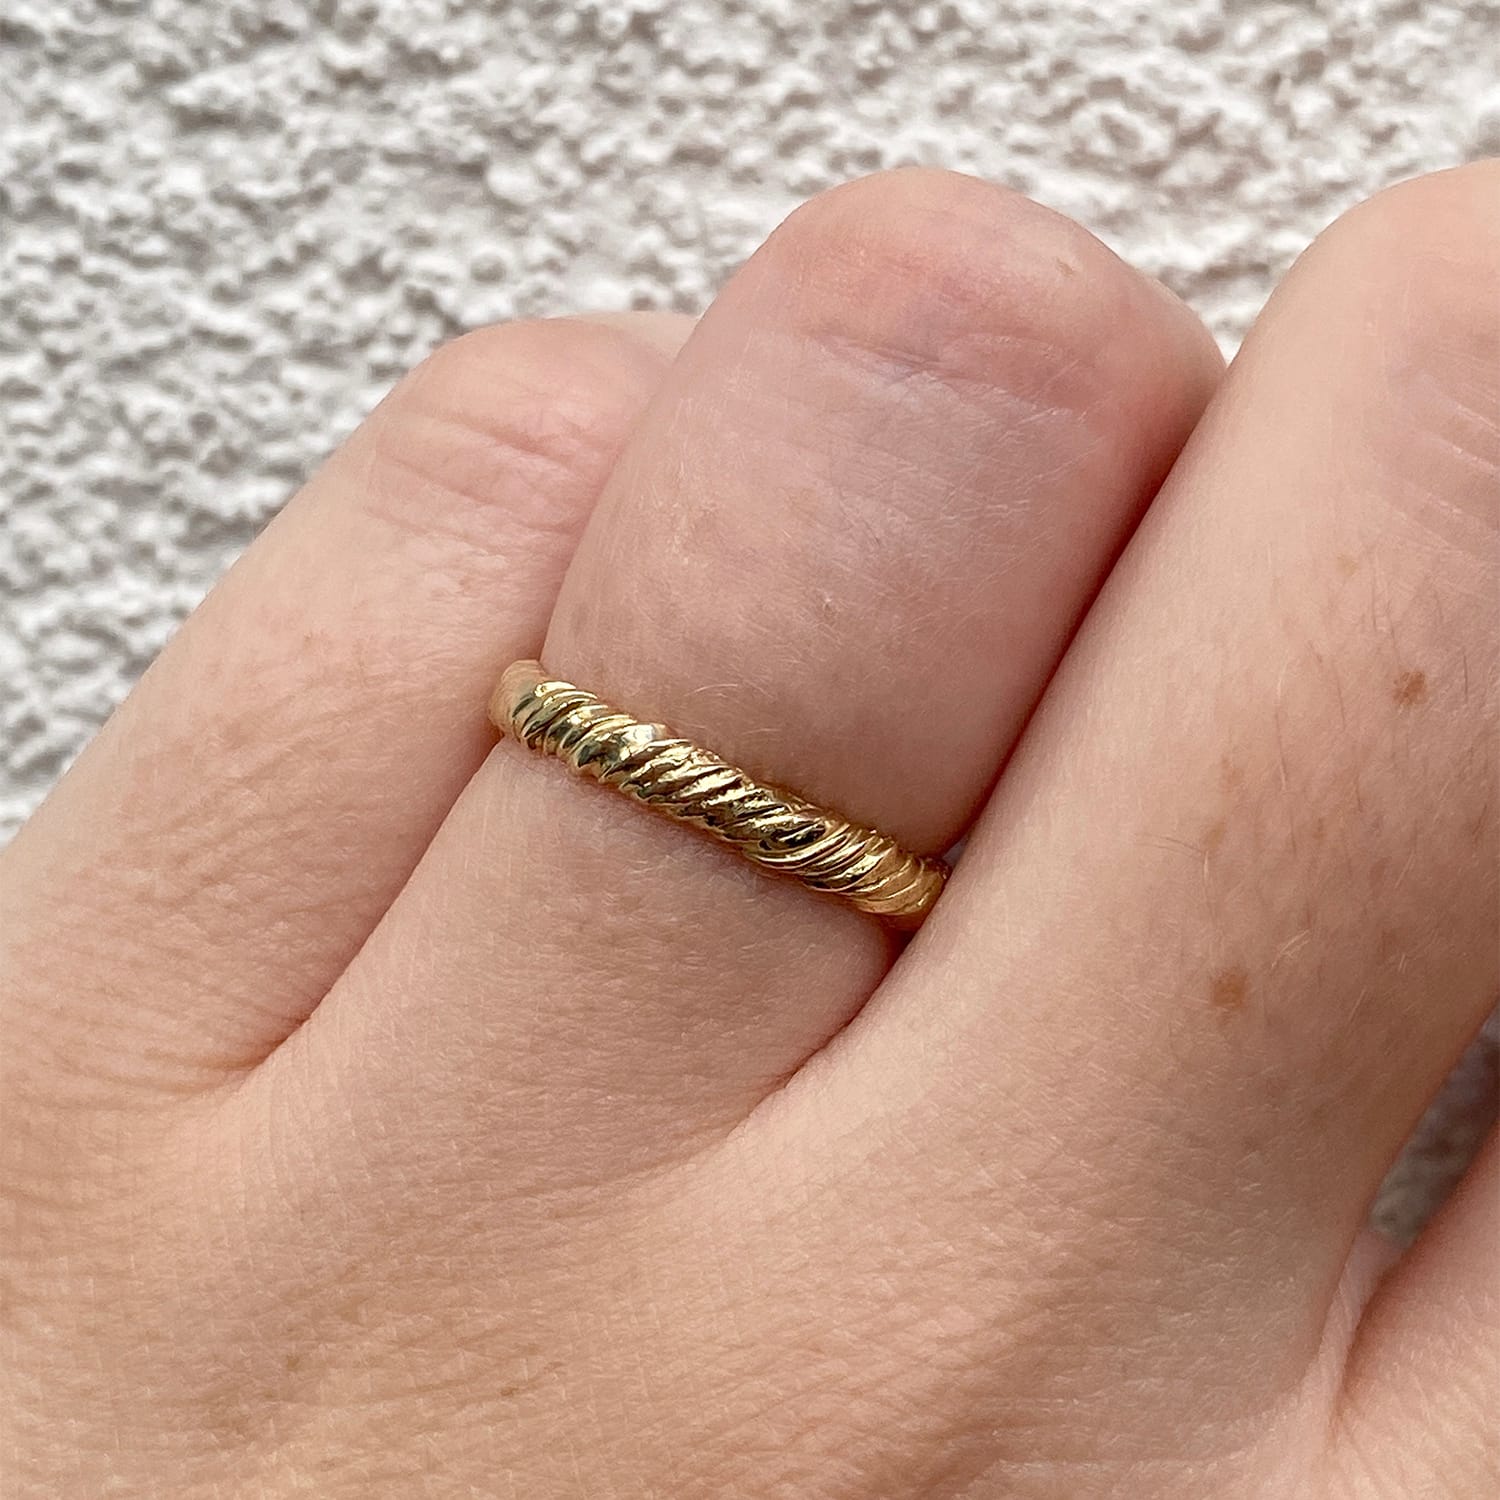 Natalie Perry Jewellery 3mm wedding band in solid gold